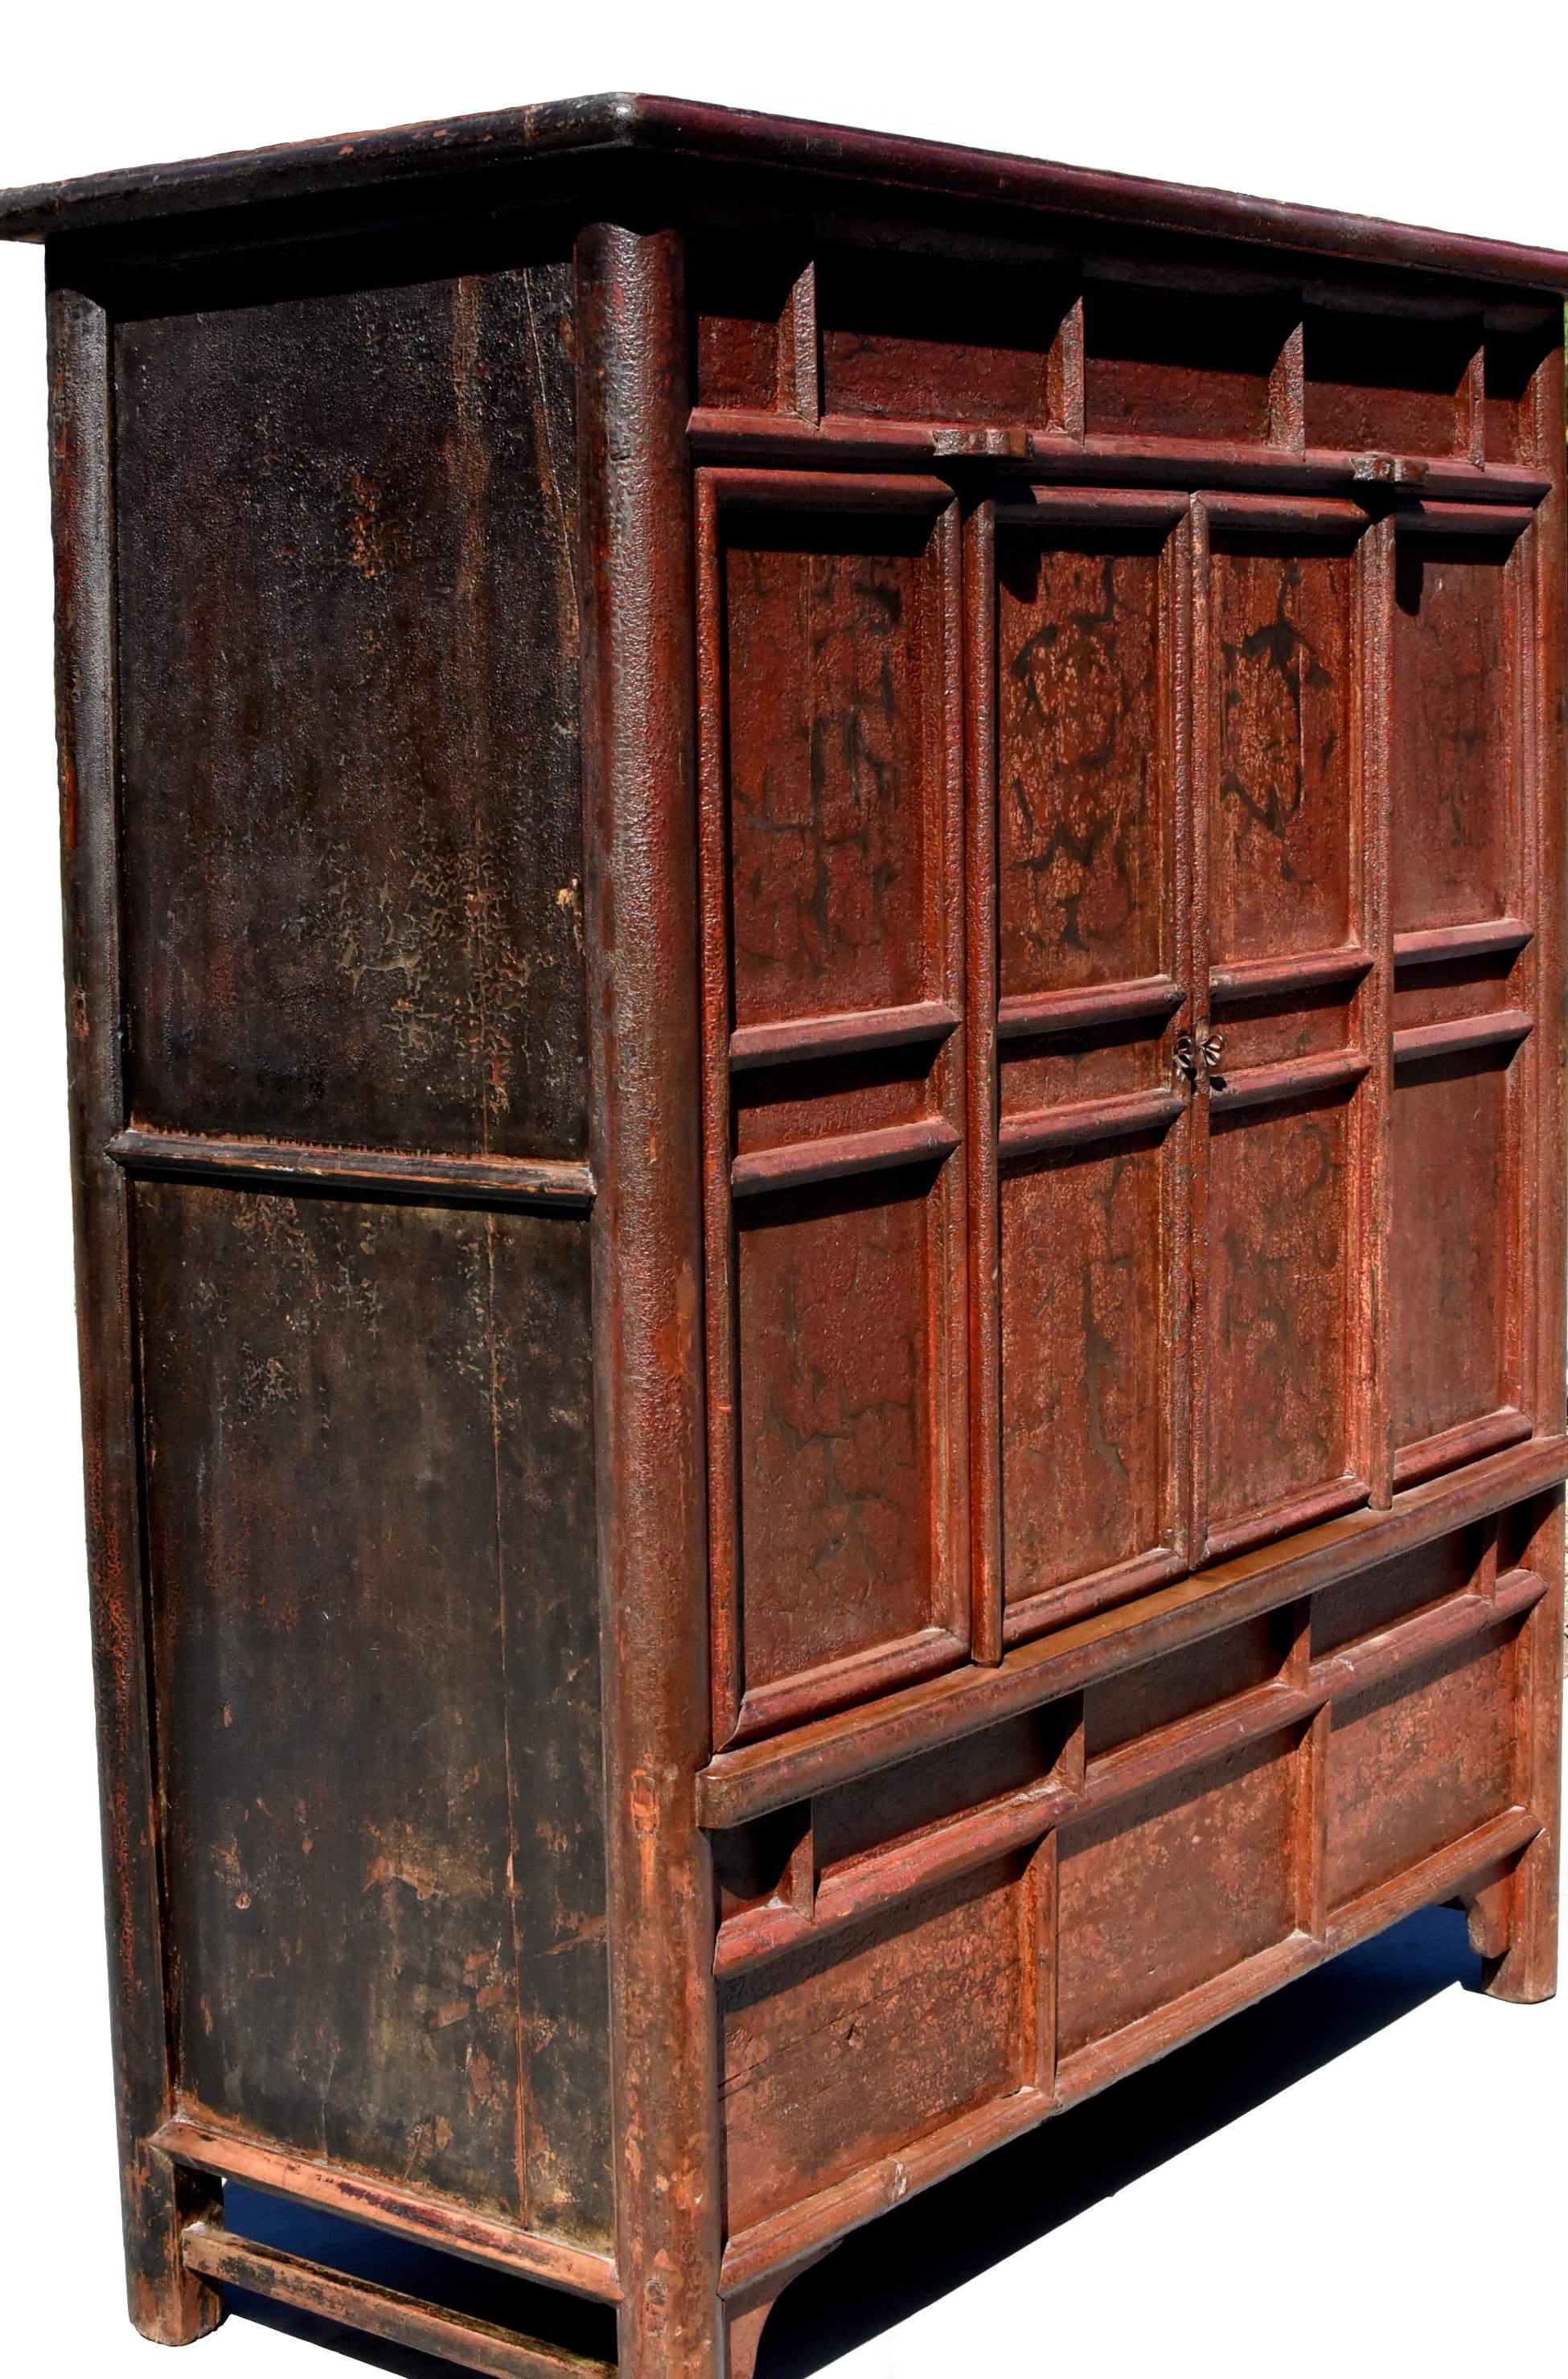 A beautiful, large, rustic, northern Chinese cabinet with crackle finish. Tenons and mortises construction. Solid wood. Removal shelf and secret compartment. Beautiful reddish brown cinnabar finish. A highly sought after piece from Shan Xi Province.